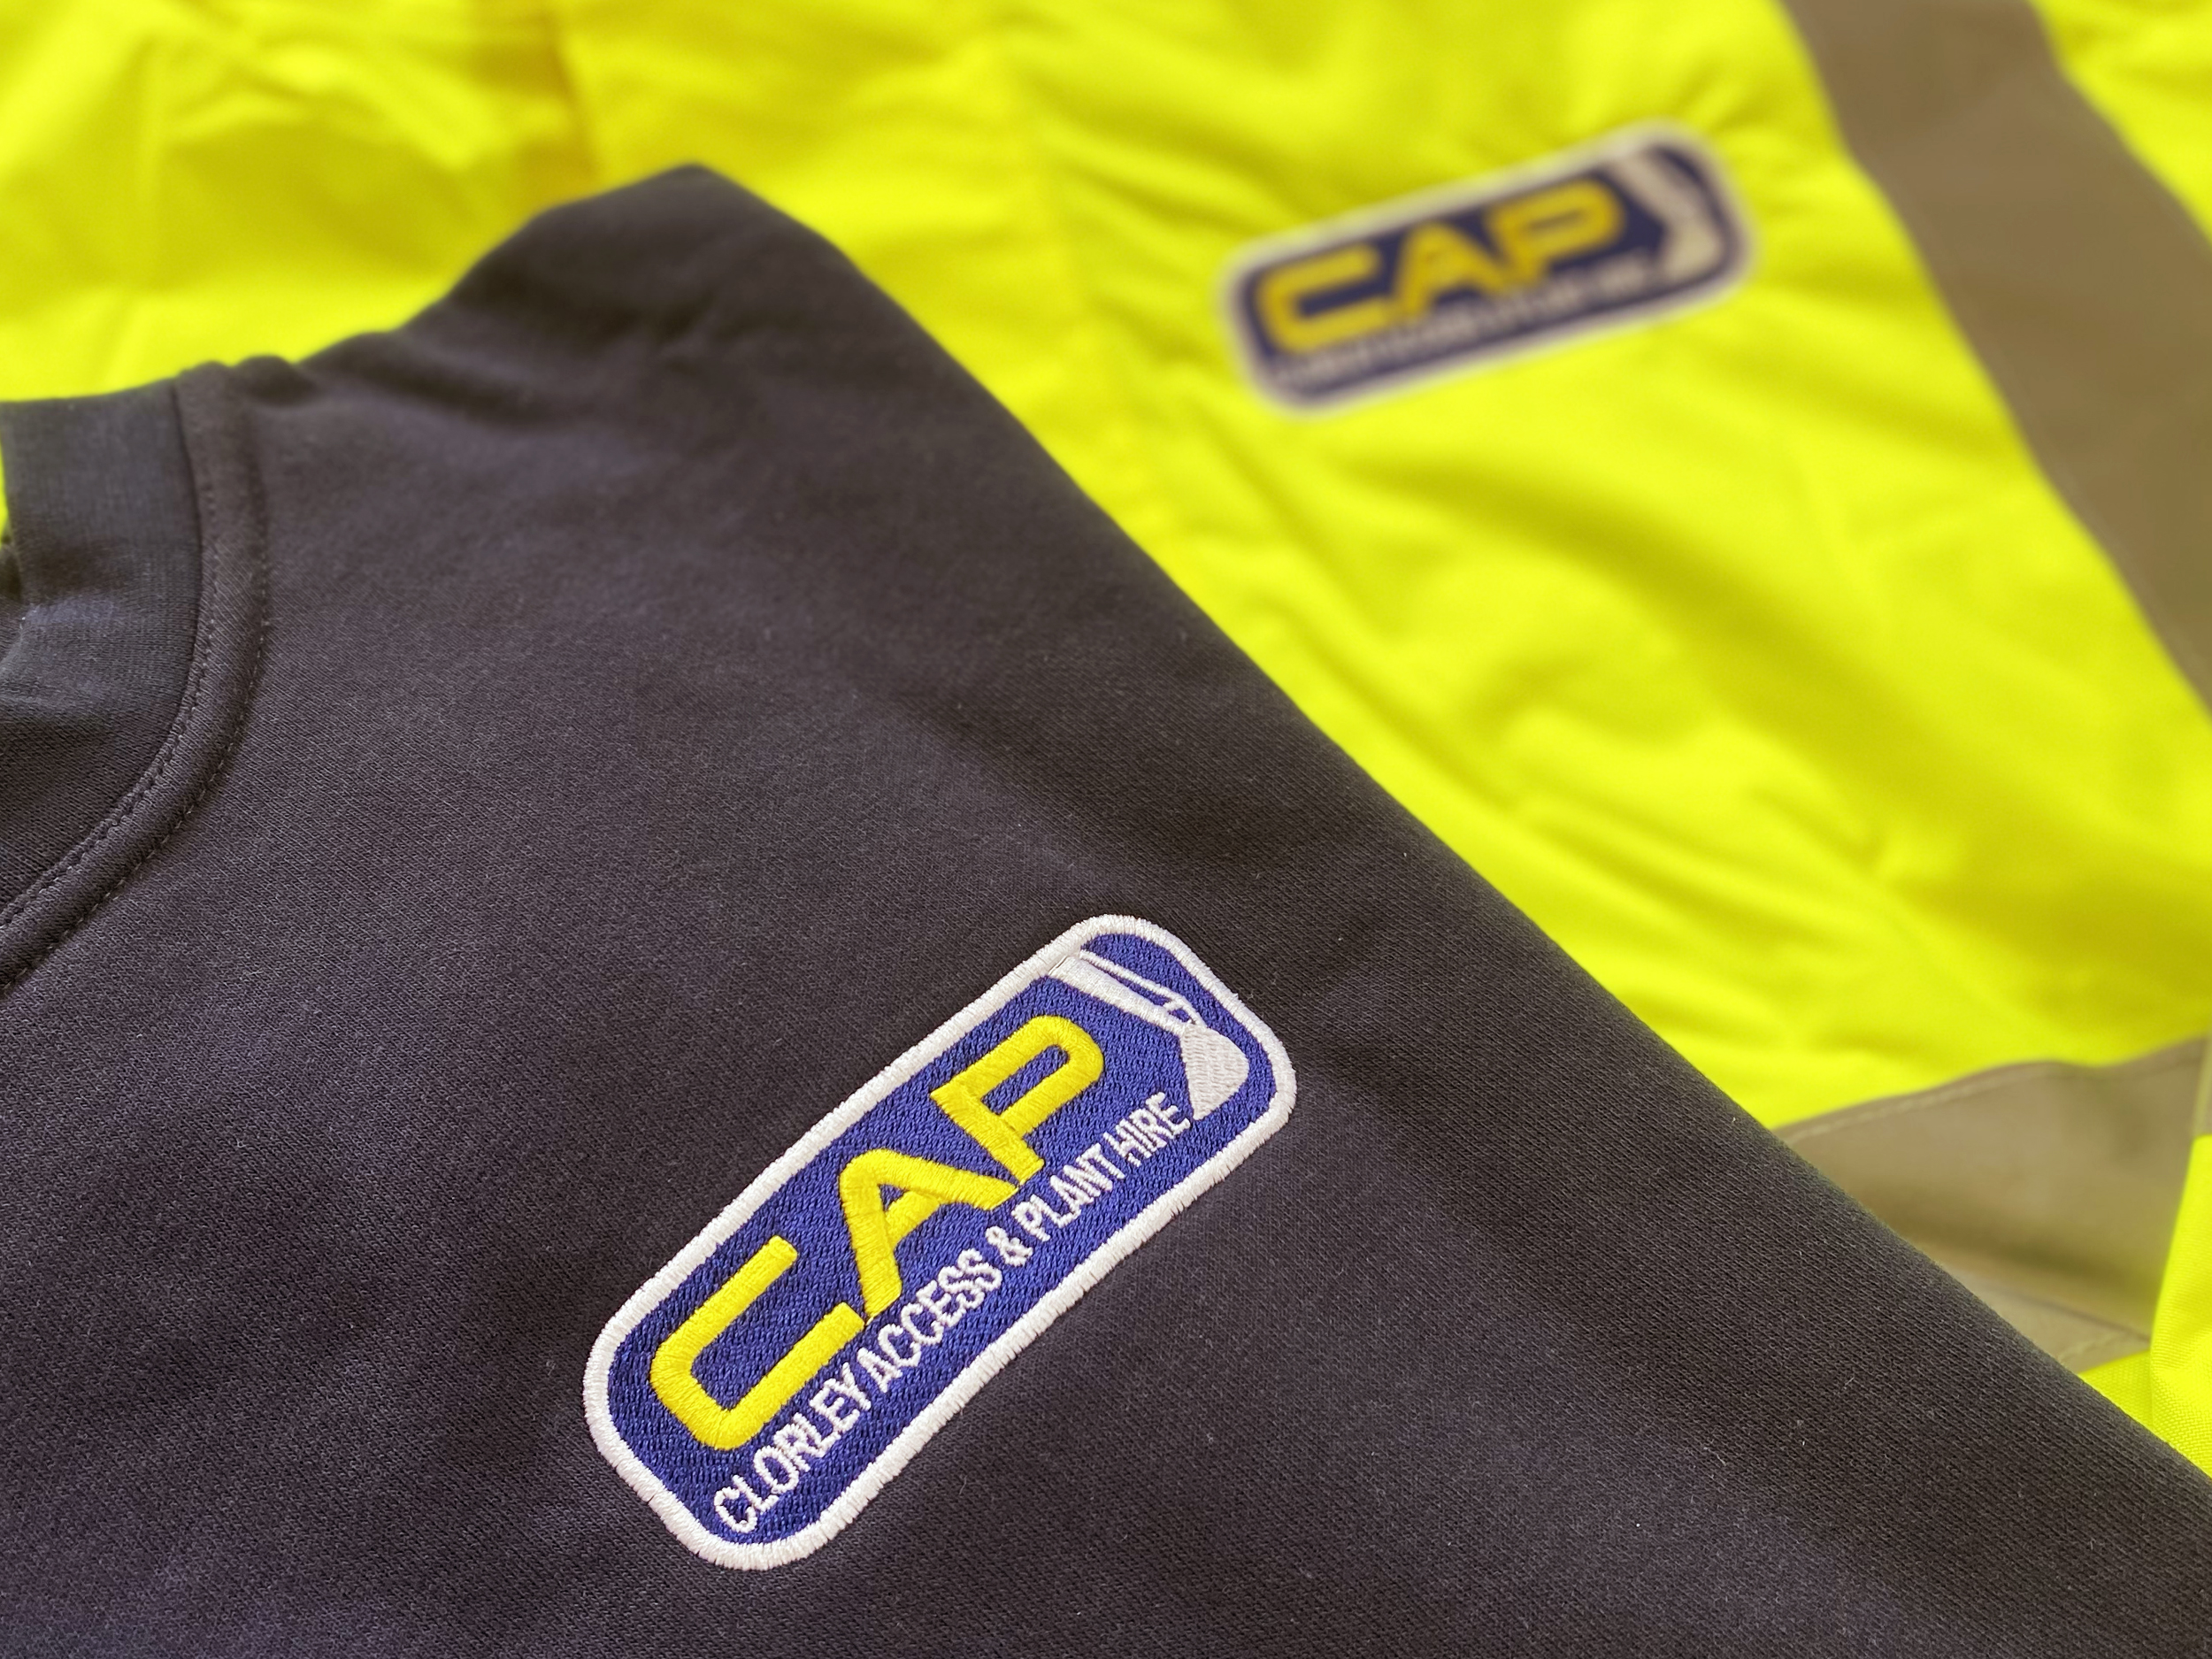 CAP Hire branded clothing